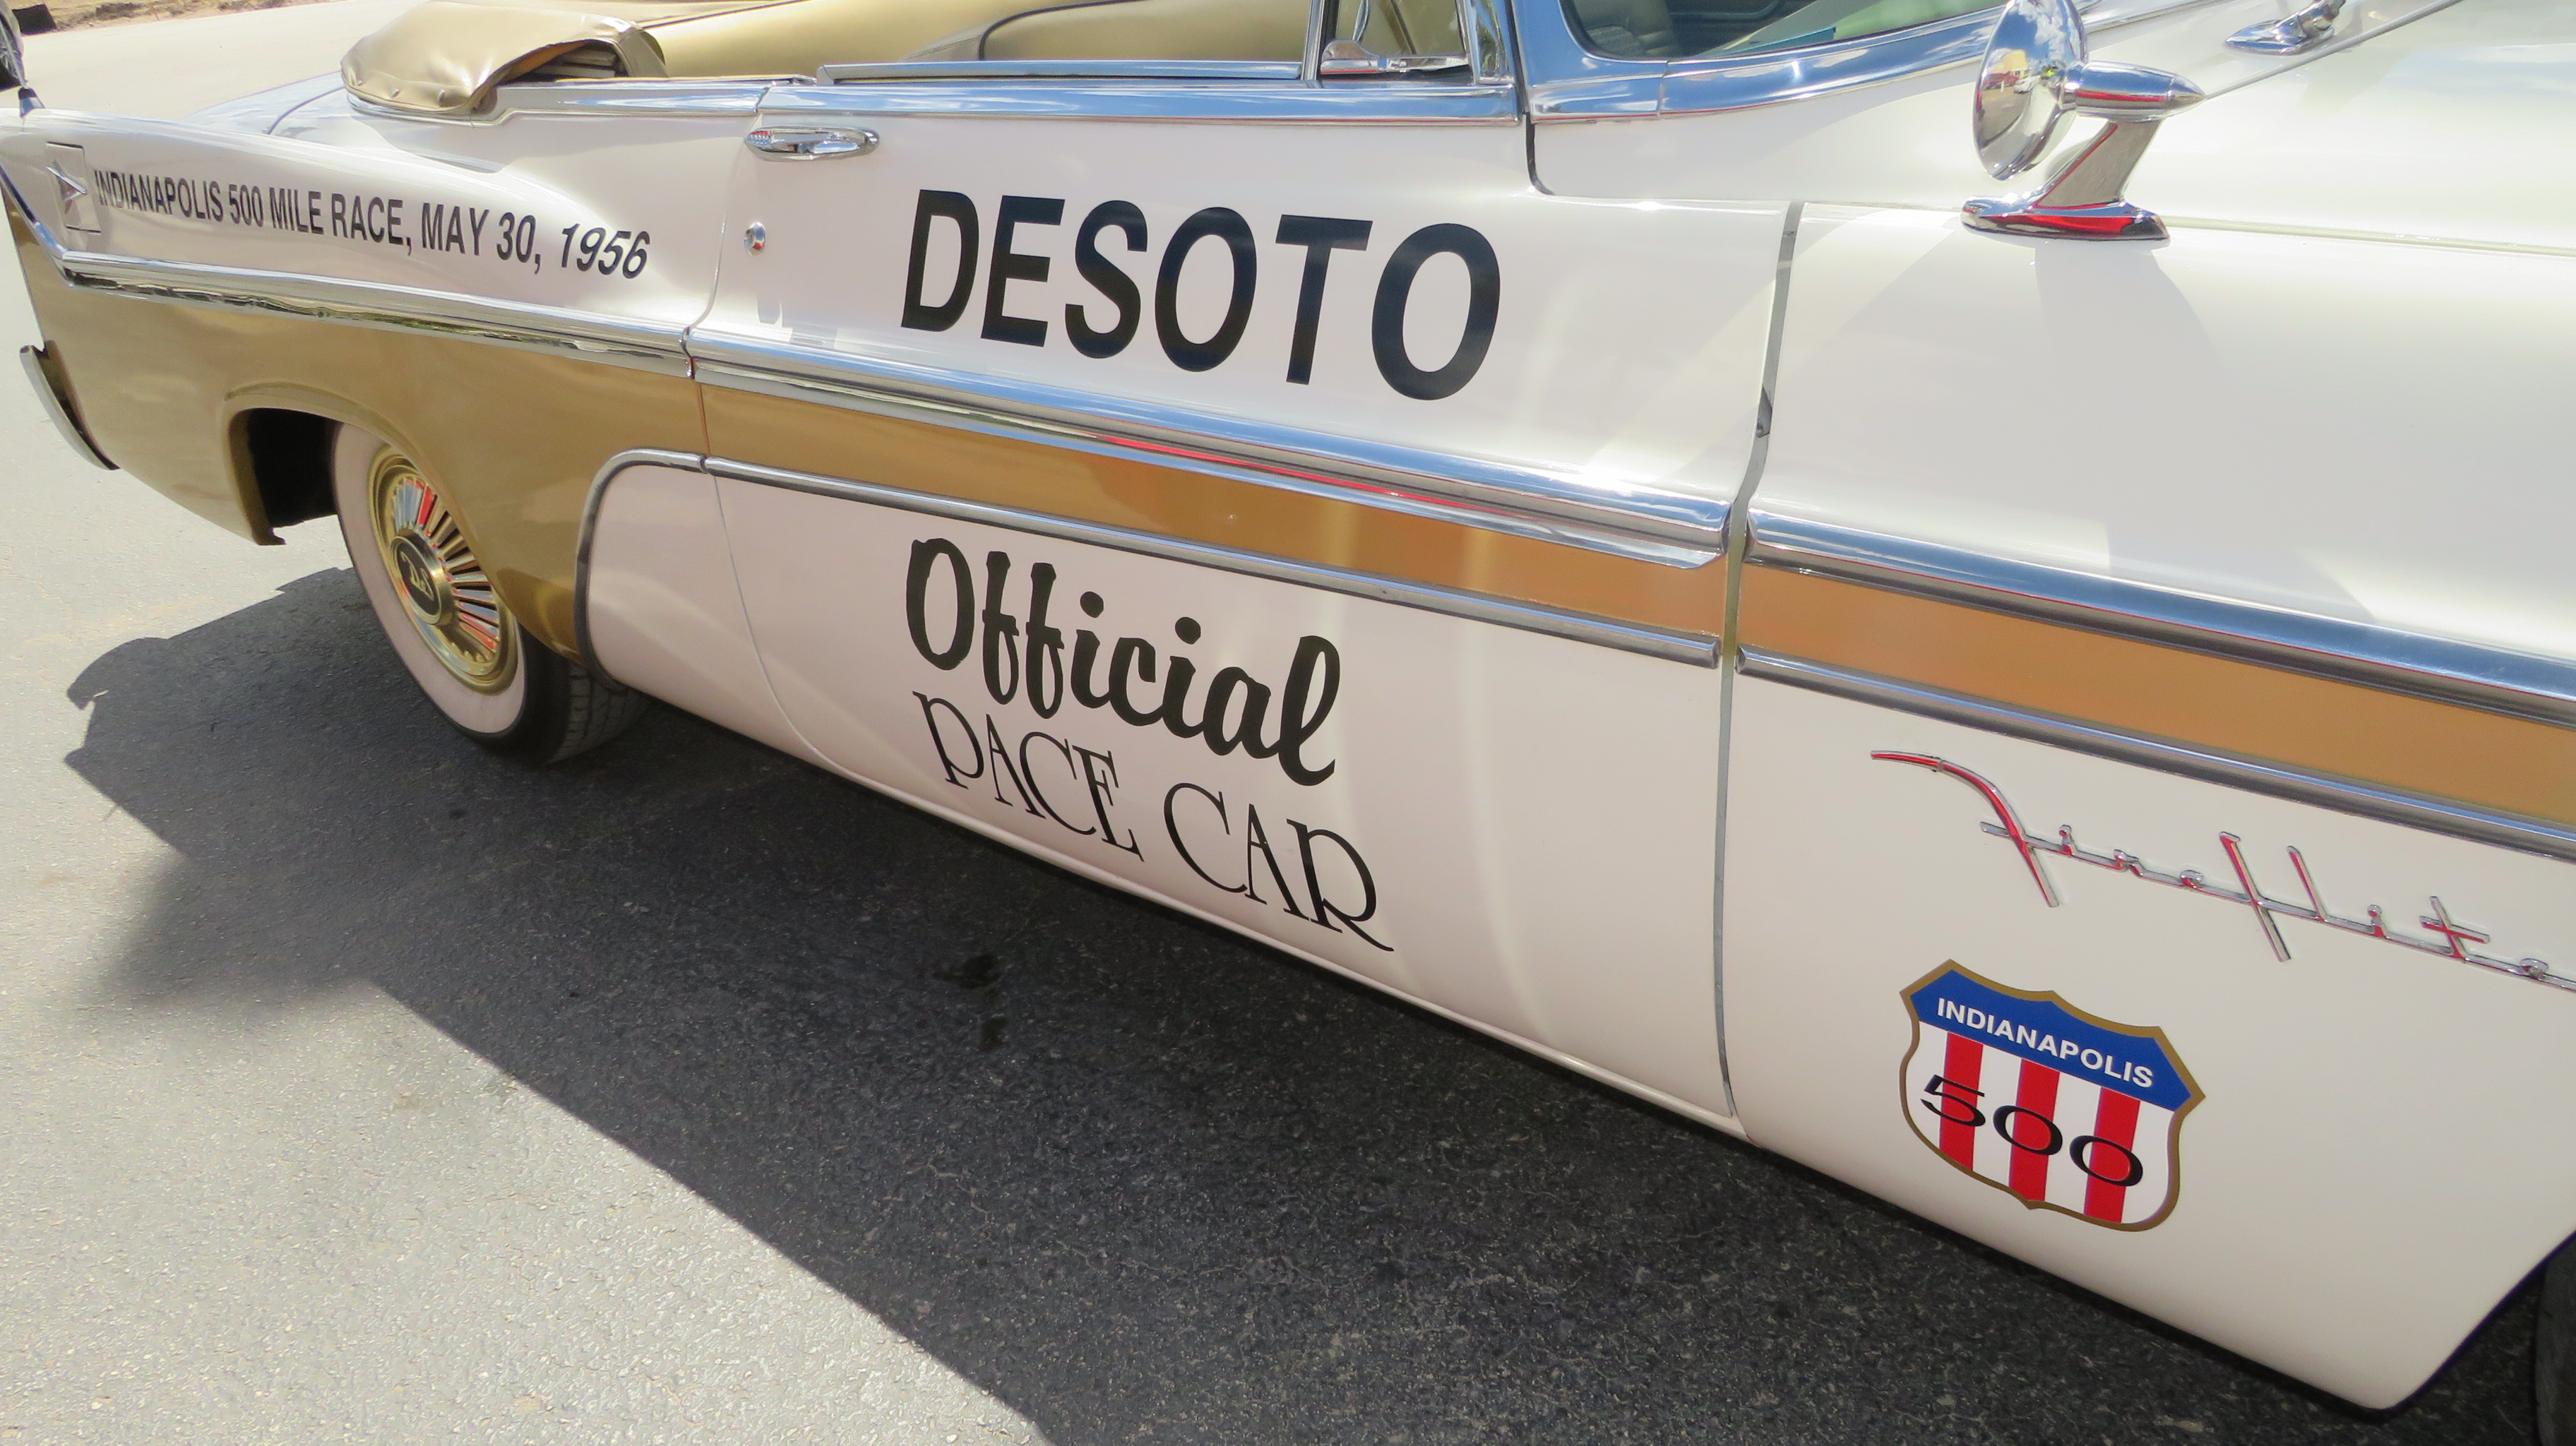 10th Image of a 1956 DESOTO PACE CAR